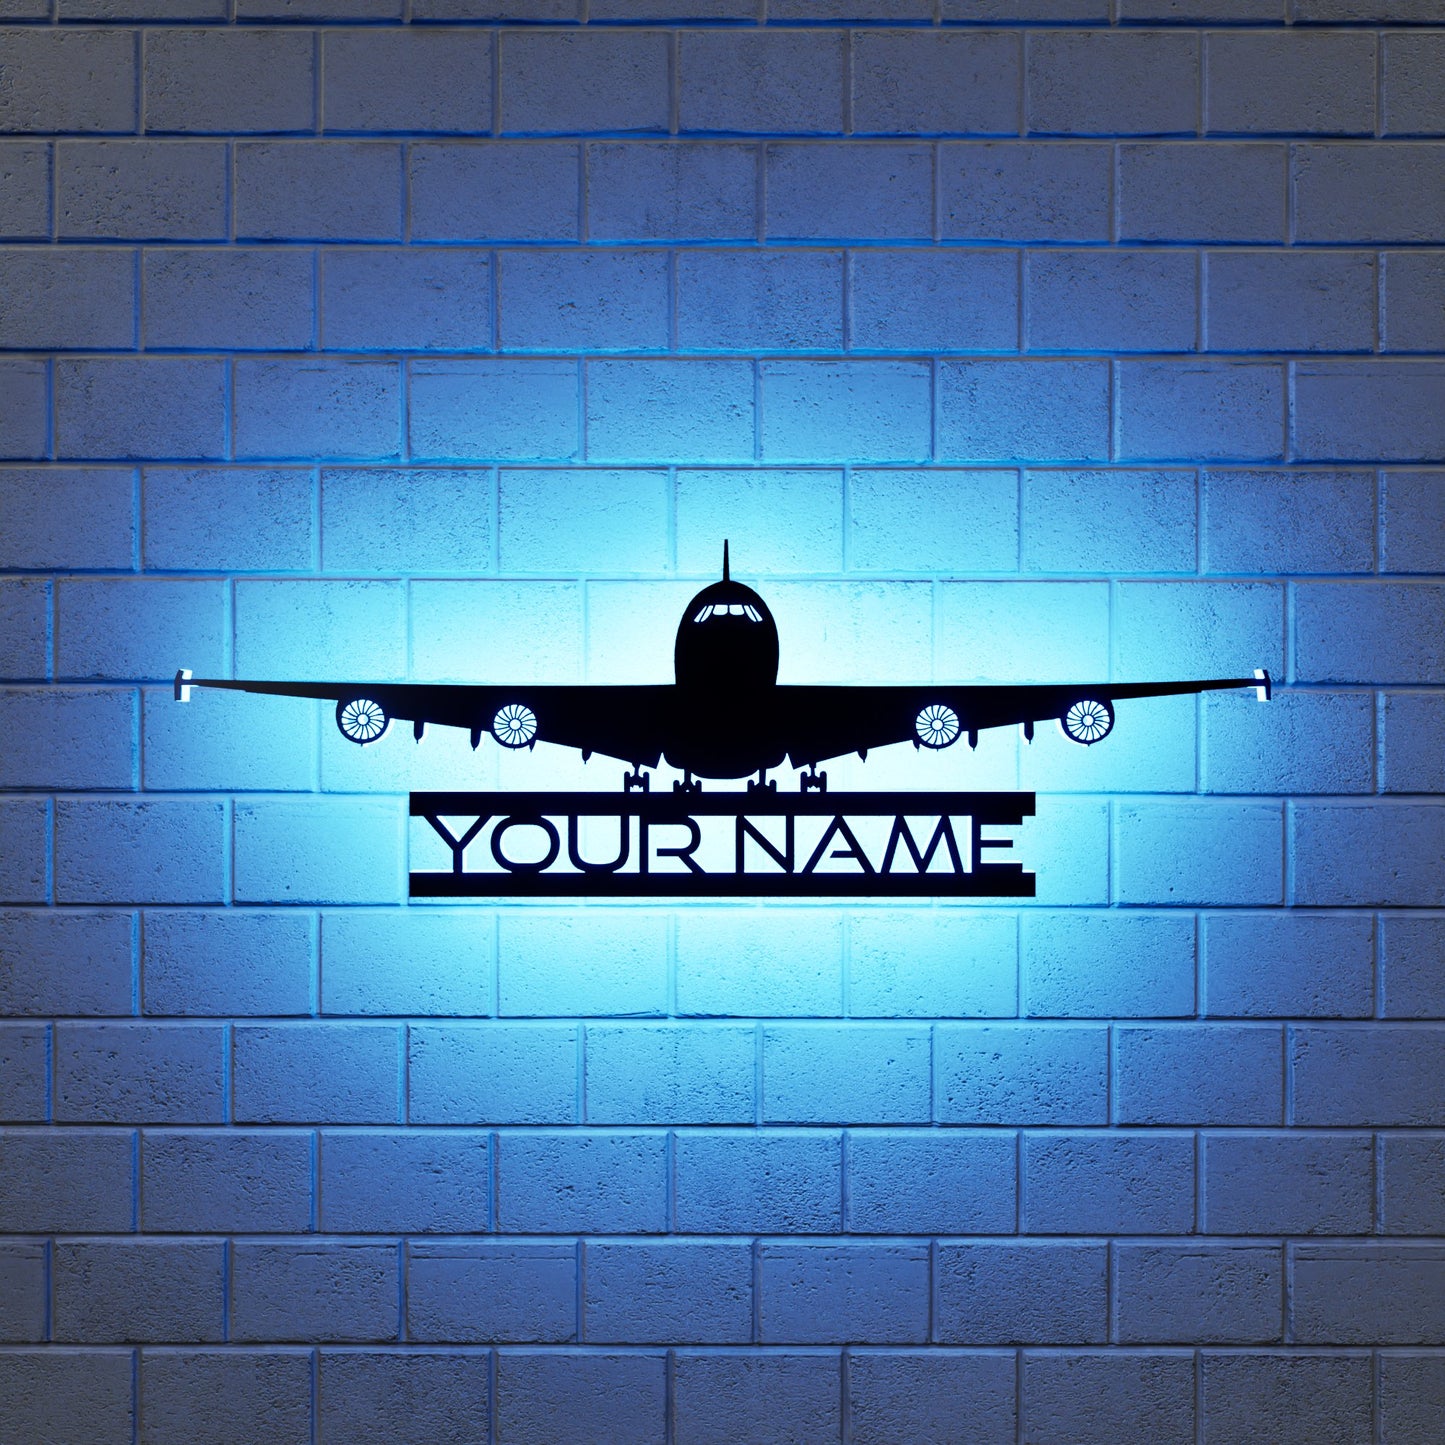 Four-engined Jet Airliner RGB Led Wall Sign Personalized - Kutalp